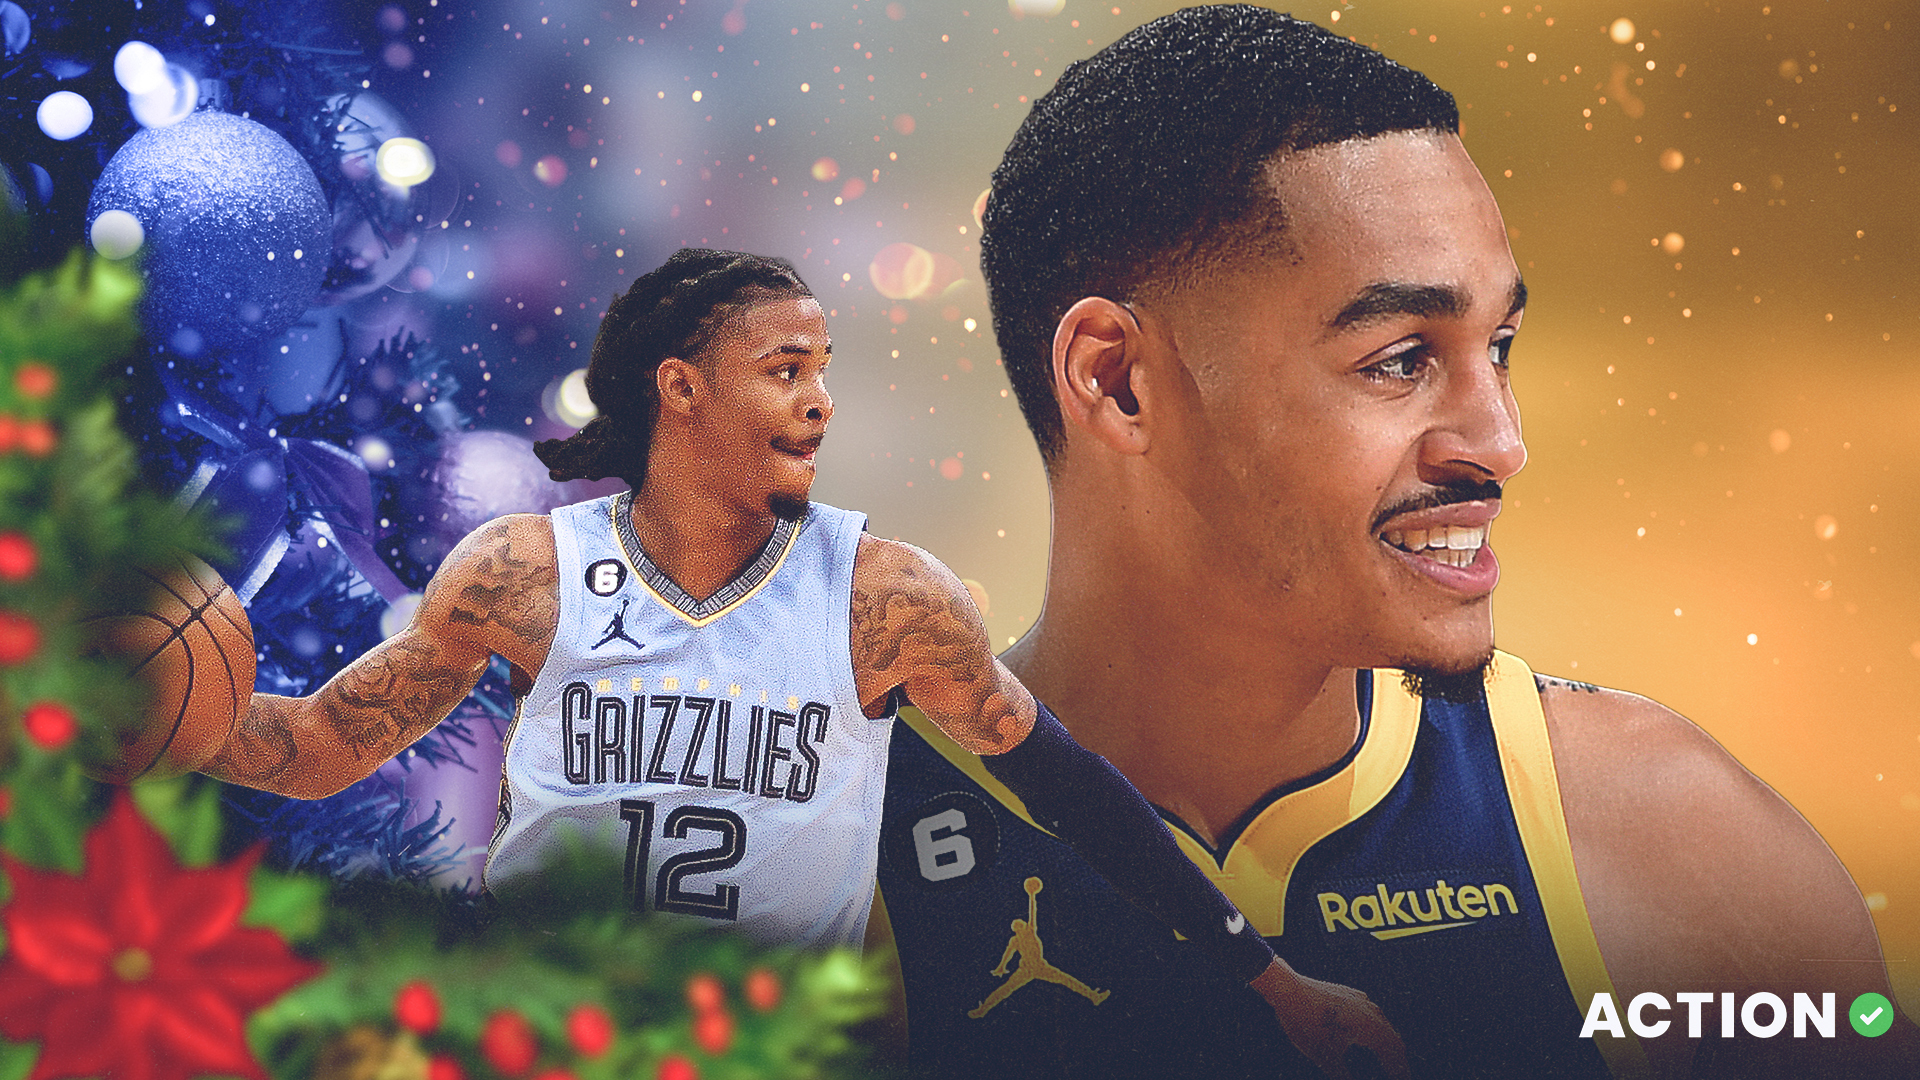 Grizzlies vs. Warriors Odds & Picks: Spread, Total, Player Prop & More Bets for Christmas Day Matchup article feature image